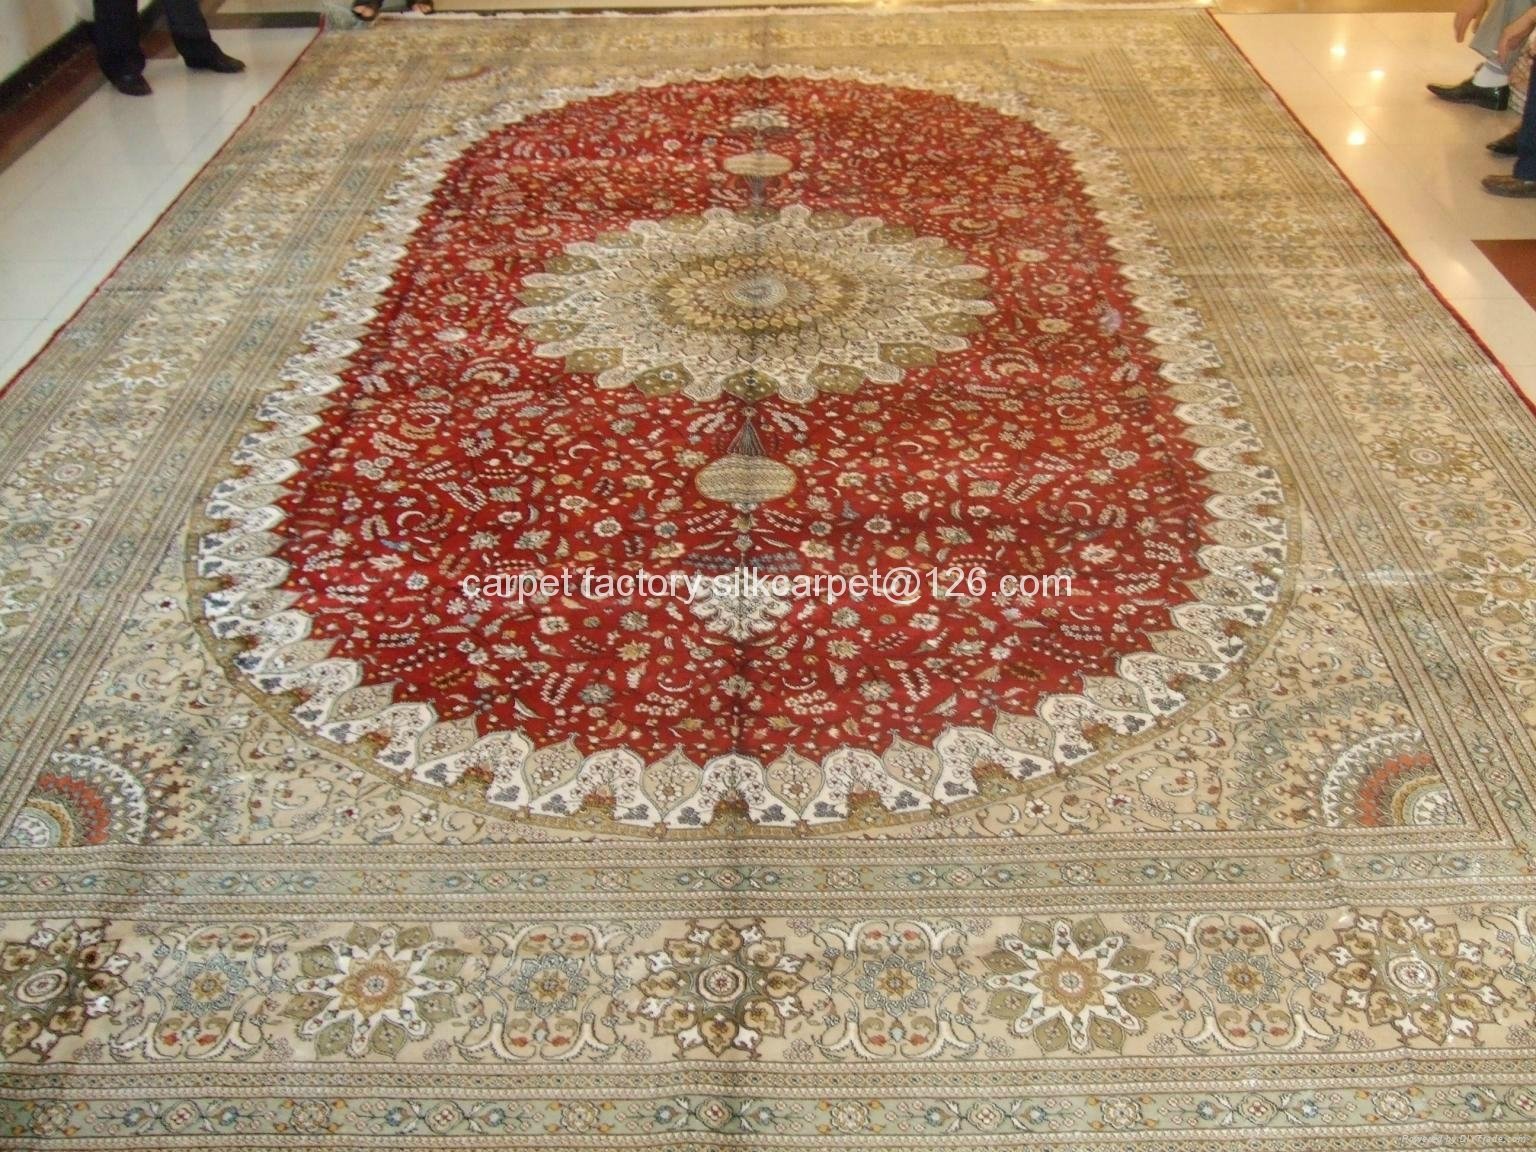 Oversized Handmade Persian carpet of the same quality as Mercedes Benz 1